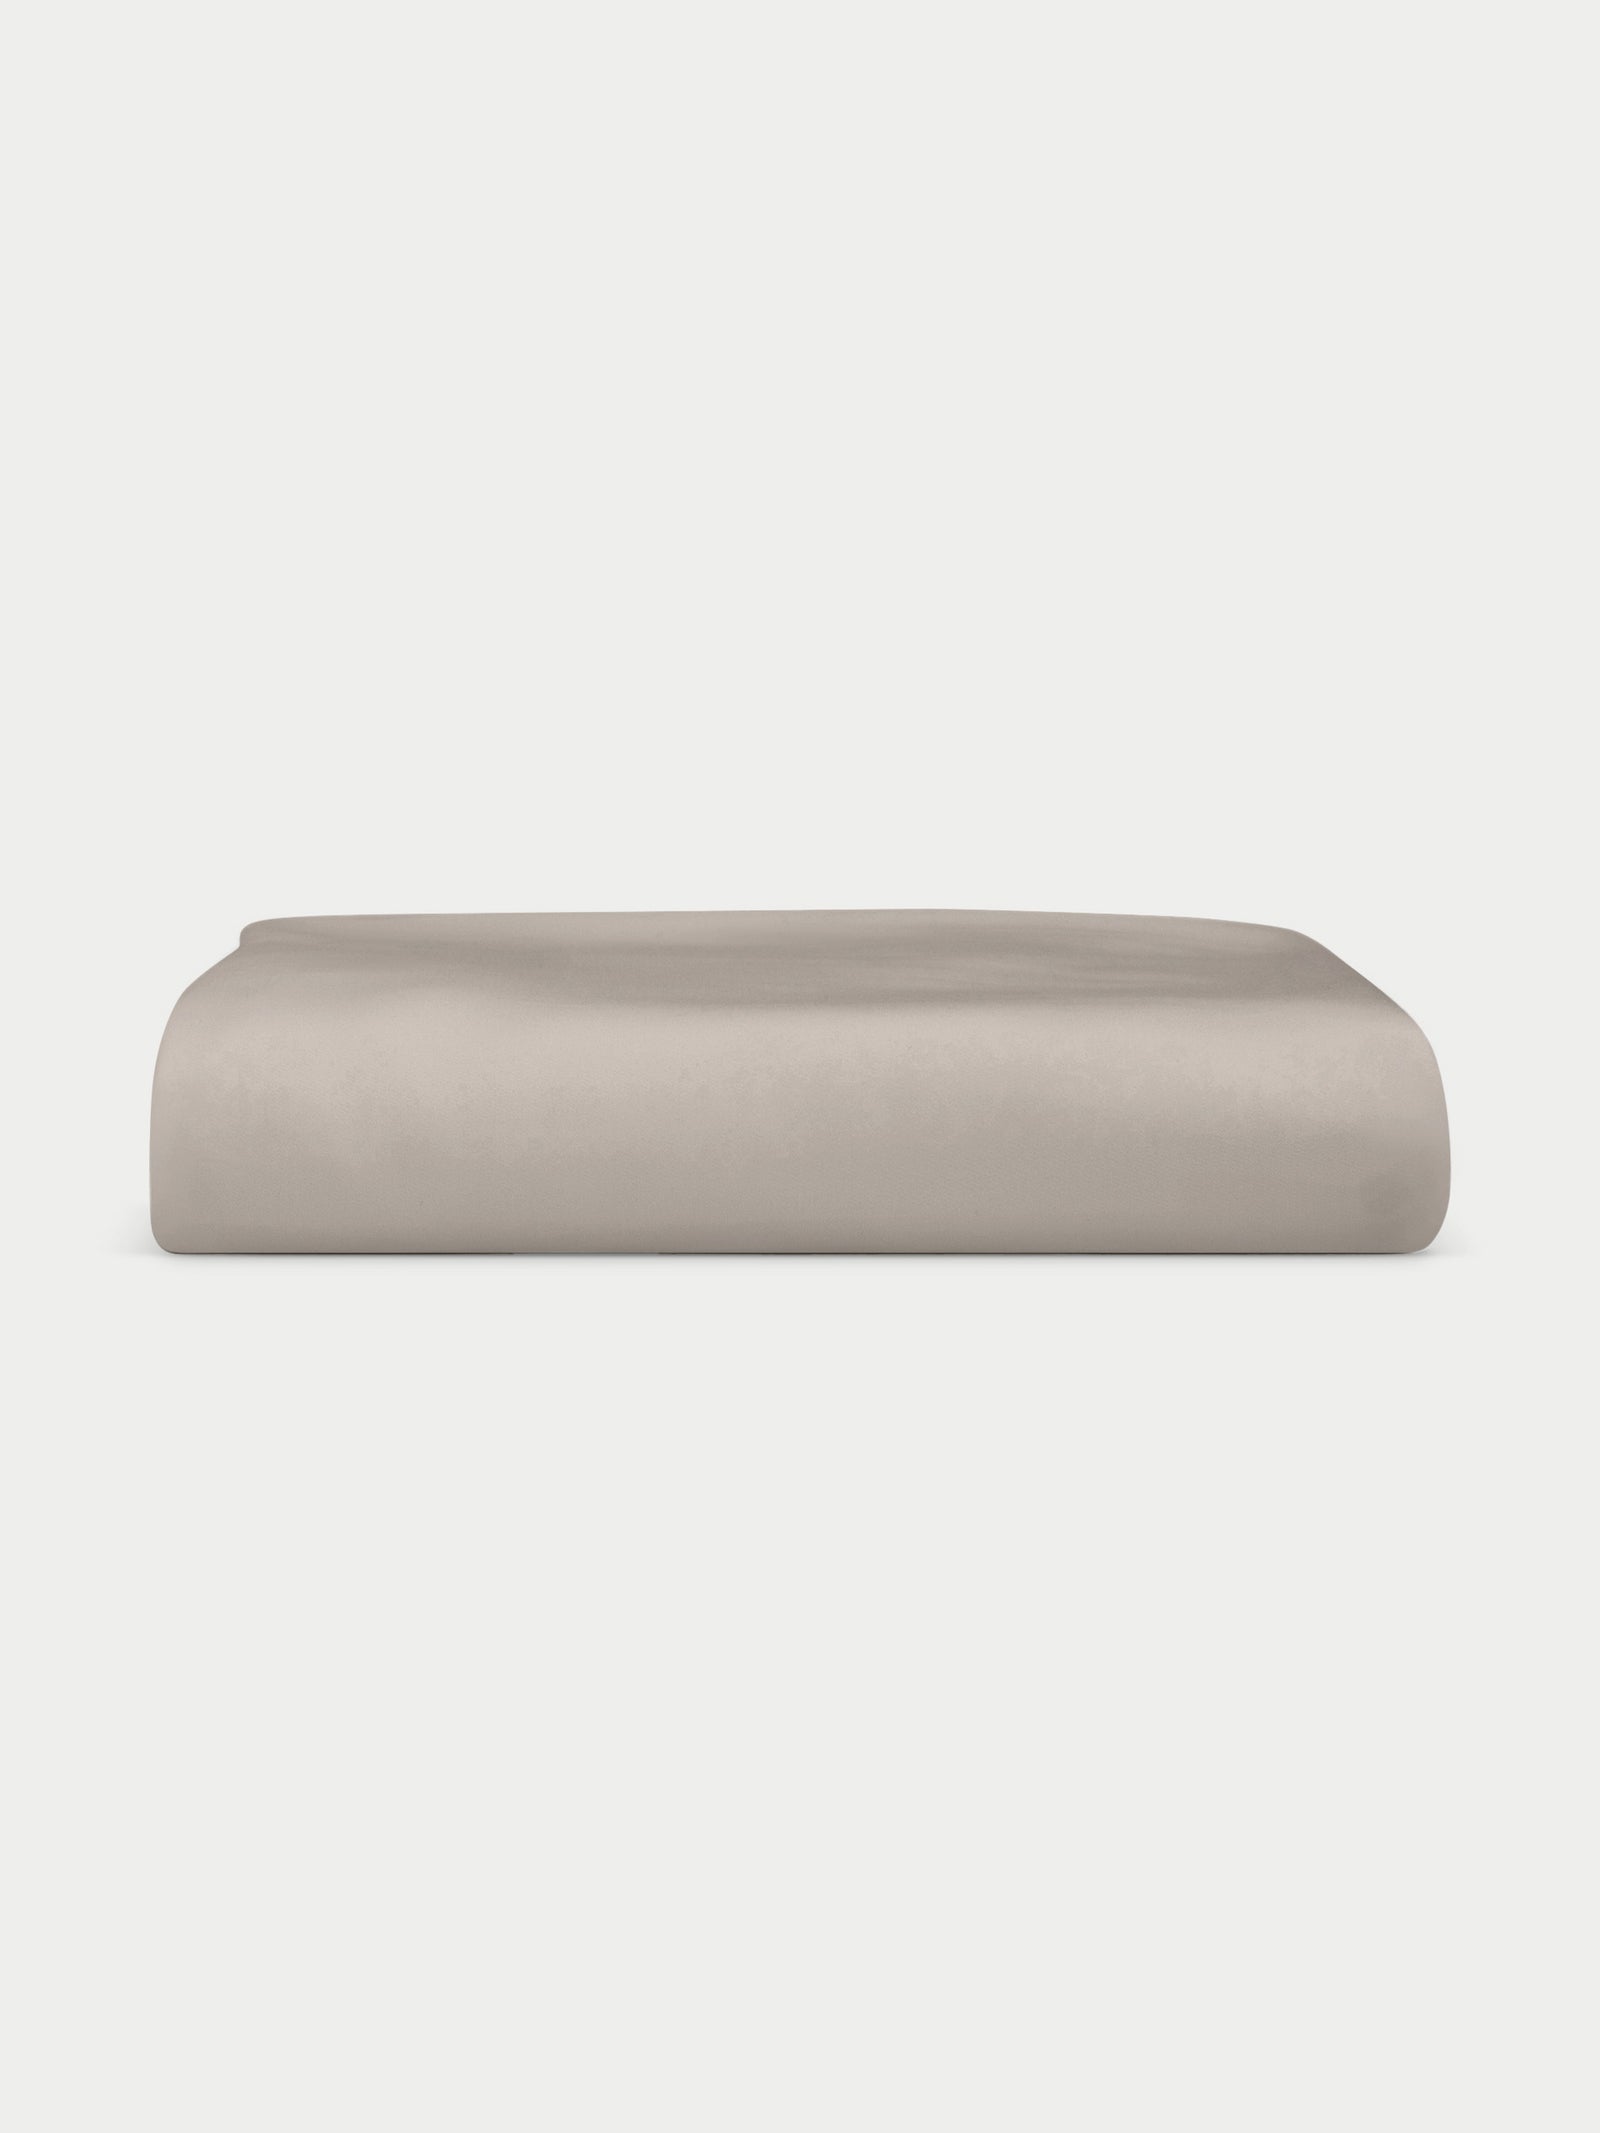 Dove Grey fitted sheet folded with white background 